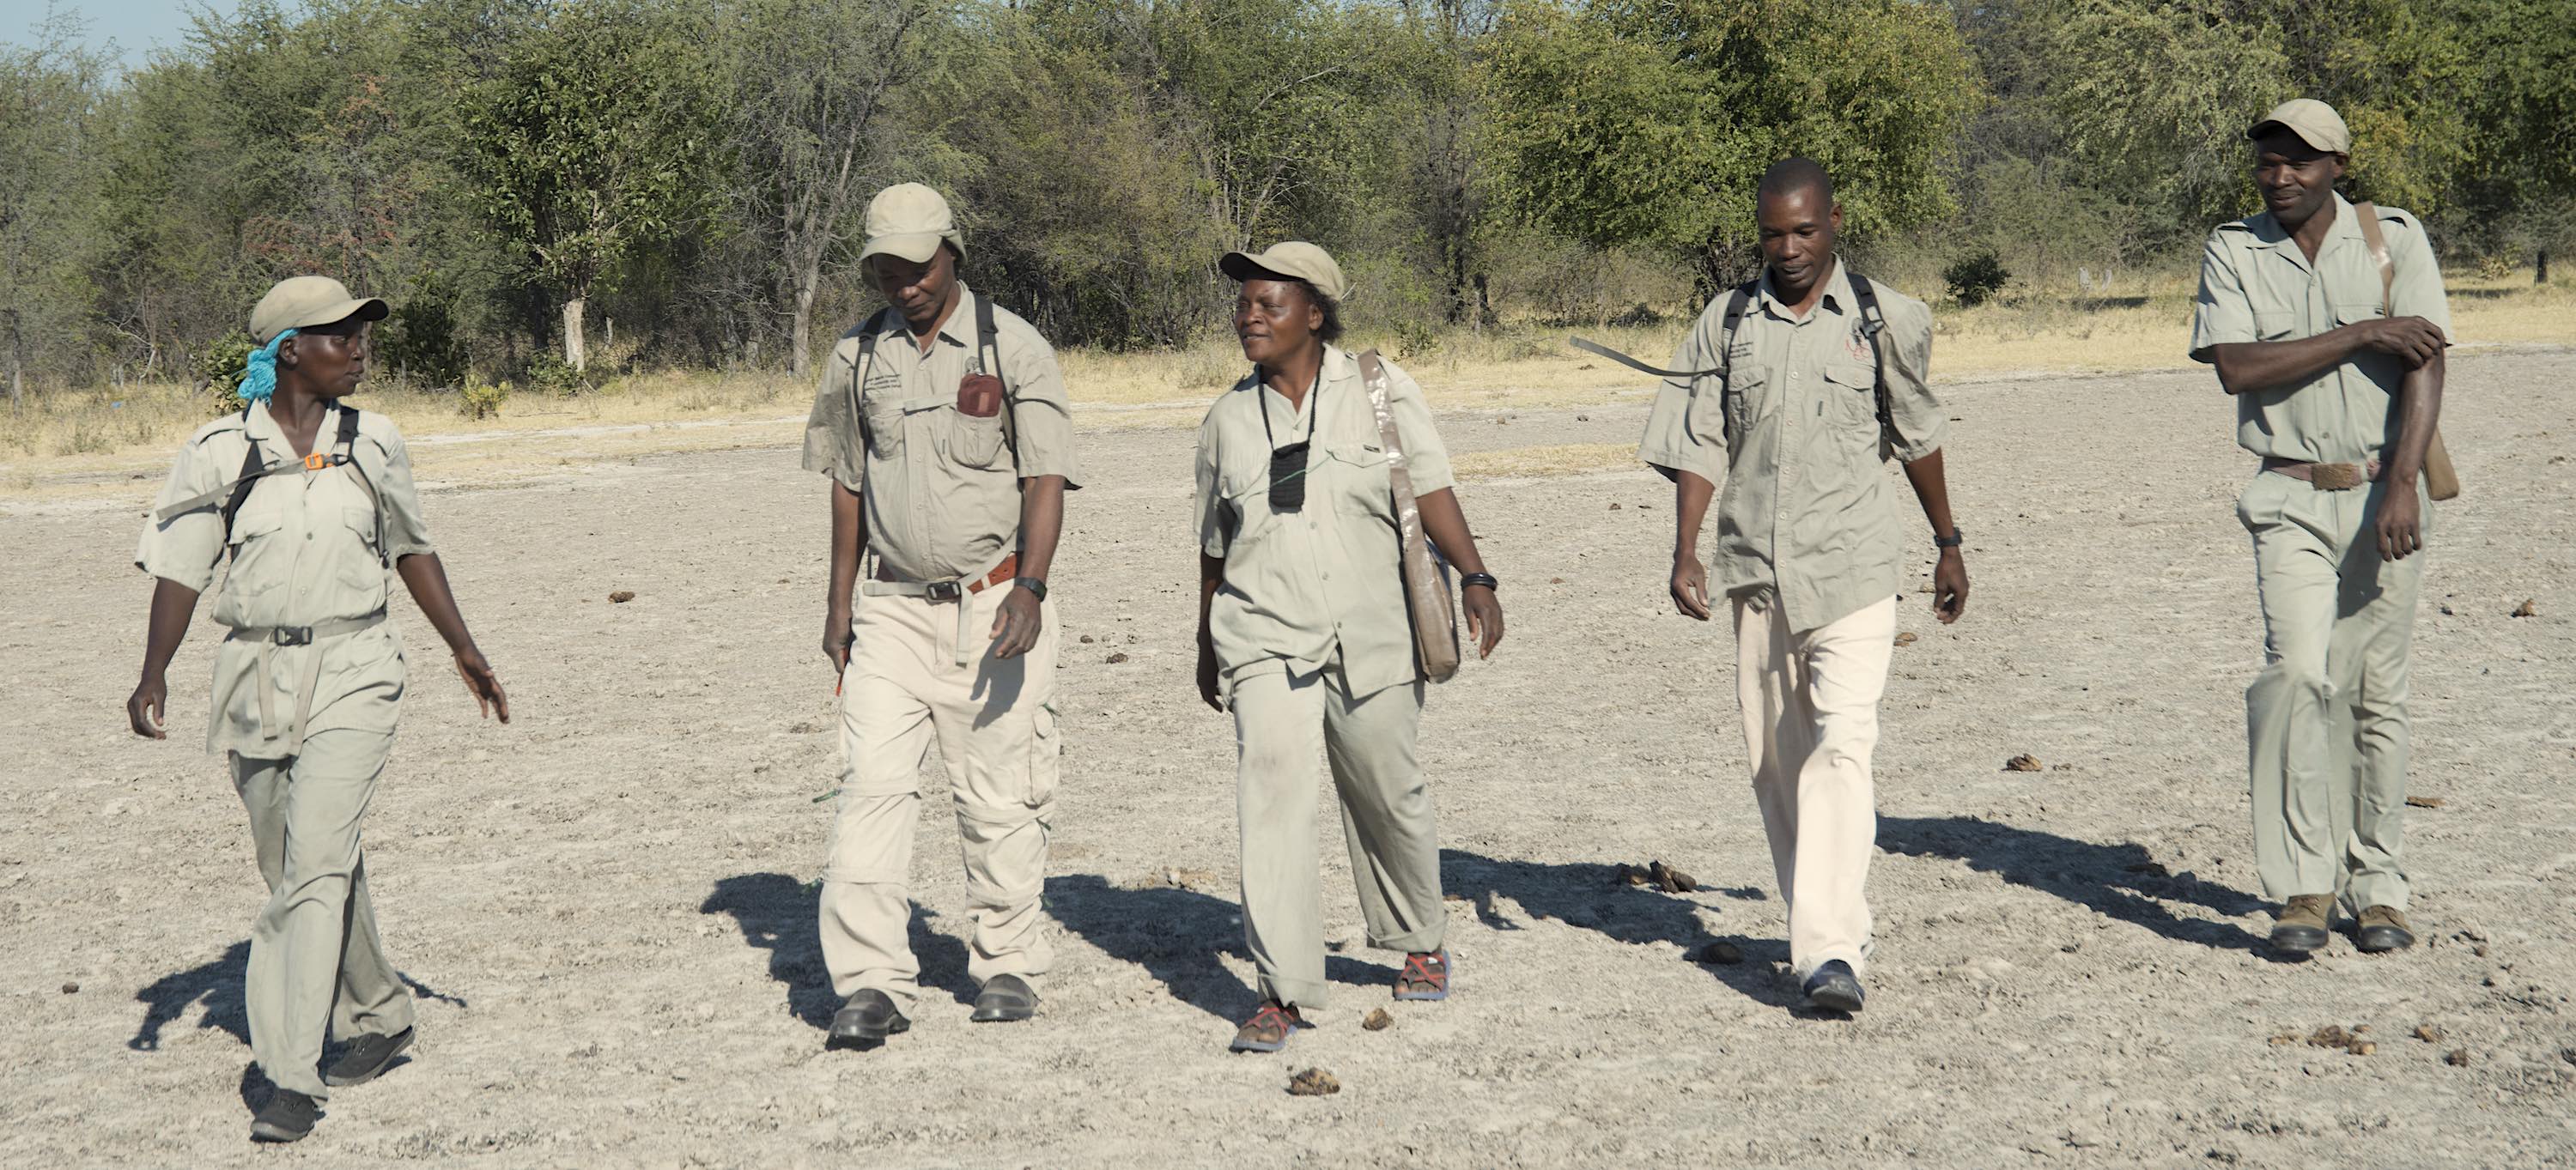 A group of five community game guards walk together across a dusty plain.